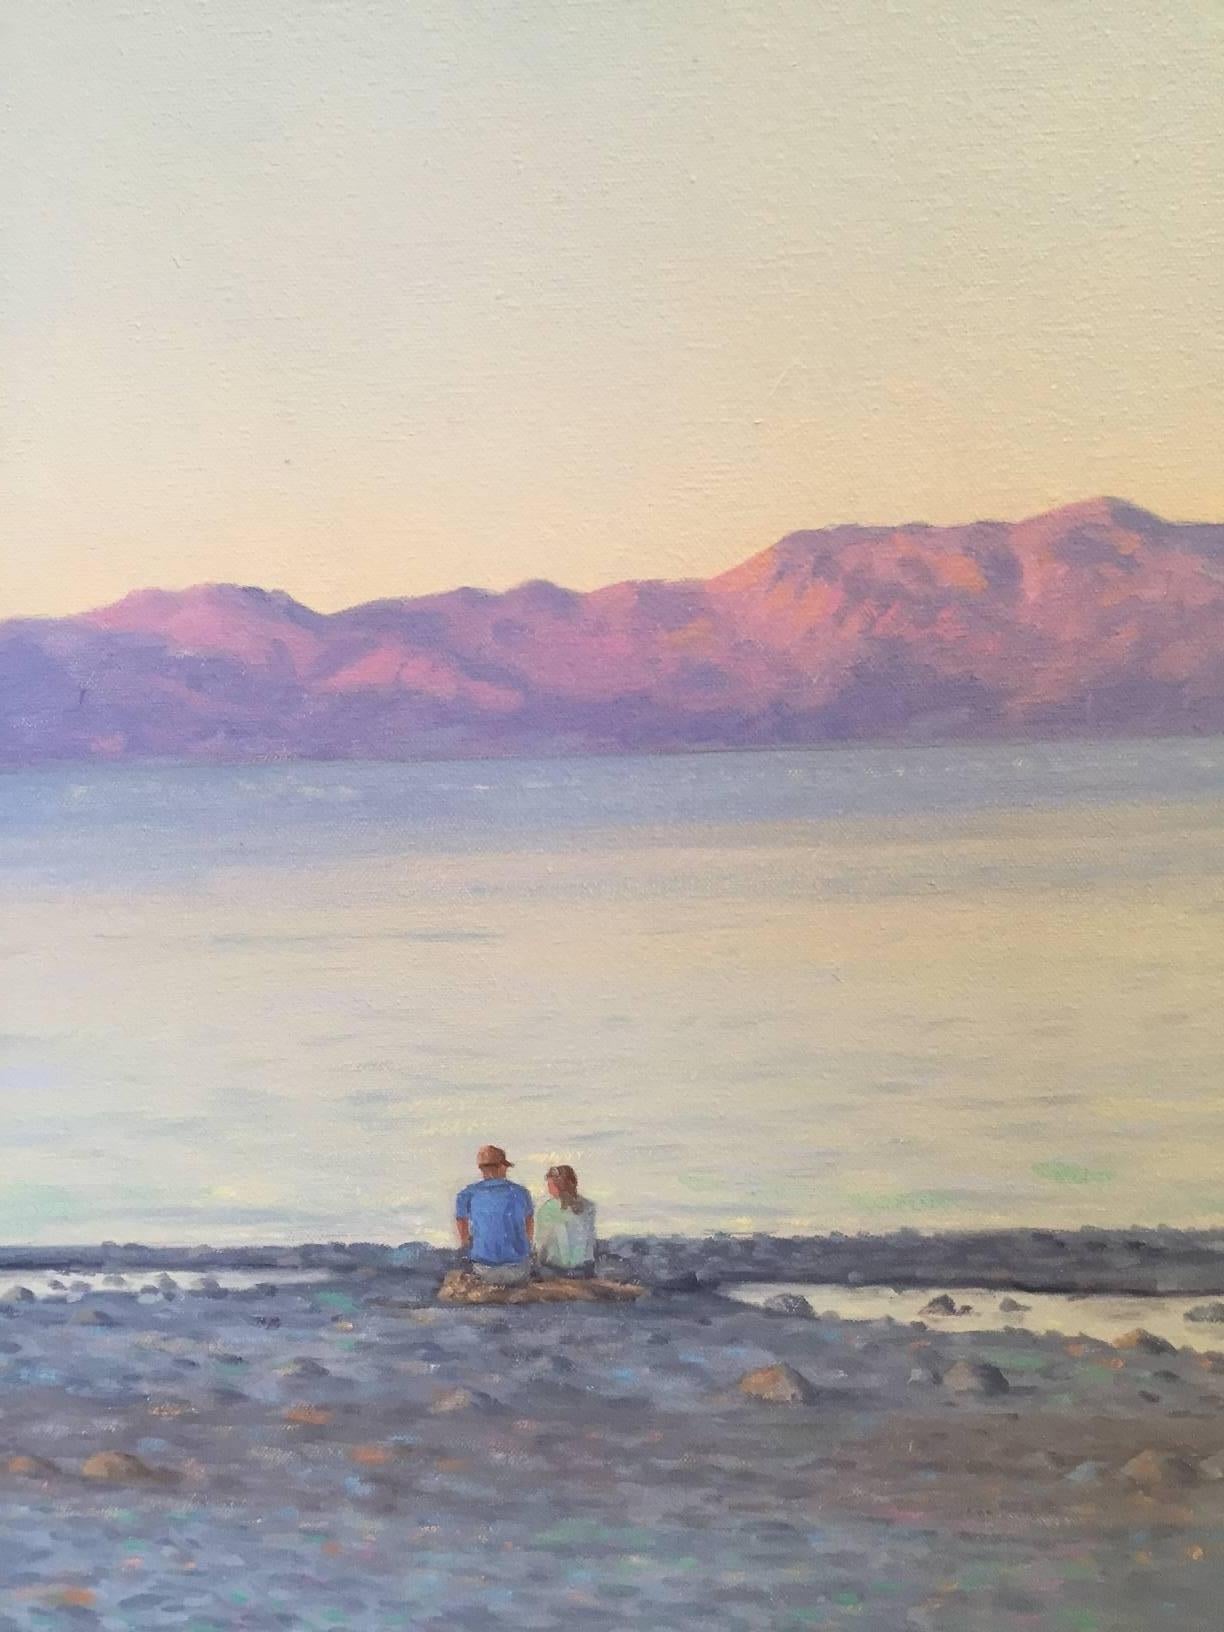 Friends and family enjoying the setting sun at Lake Tahoe with early evening light and majestic alpine mountain ridge in the distance.  Willard Dixon is one of the finest American contemporary realist painters living today. The artist has painted